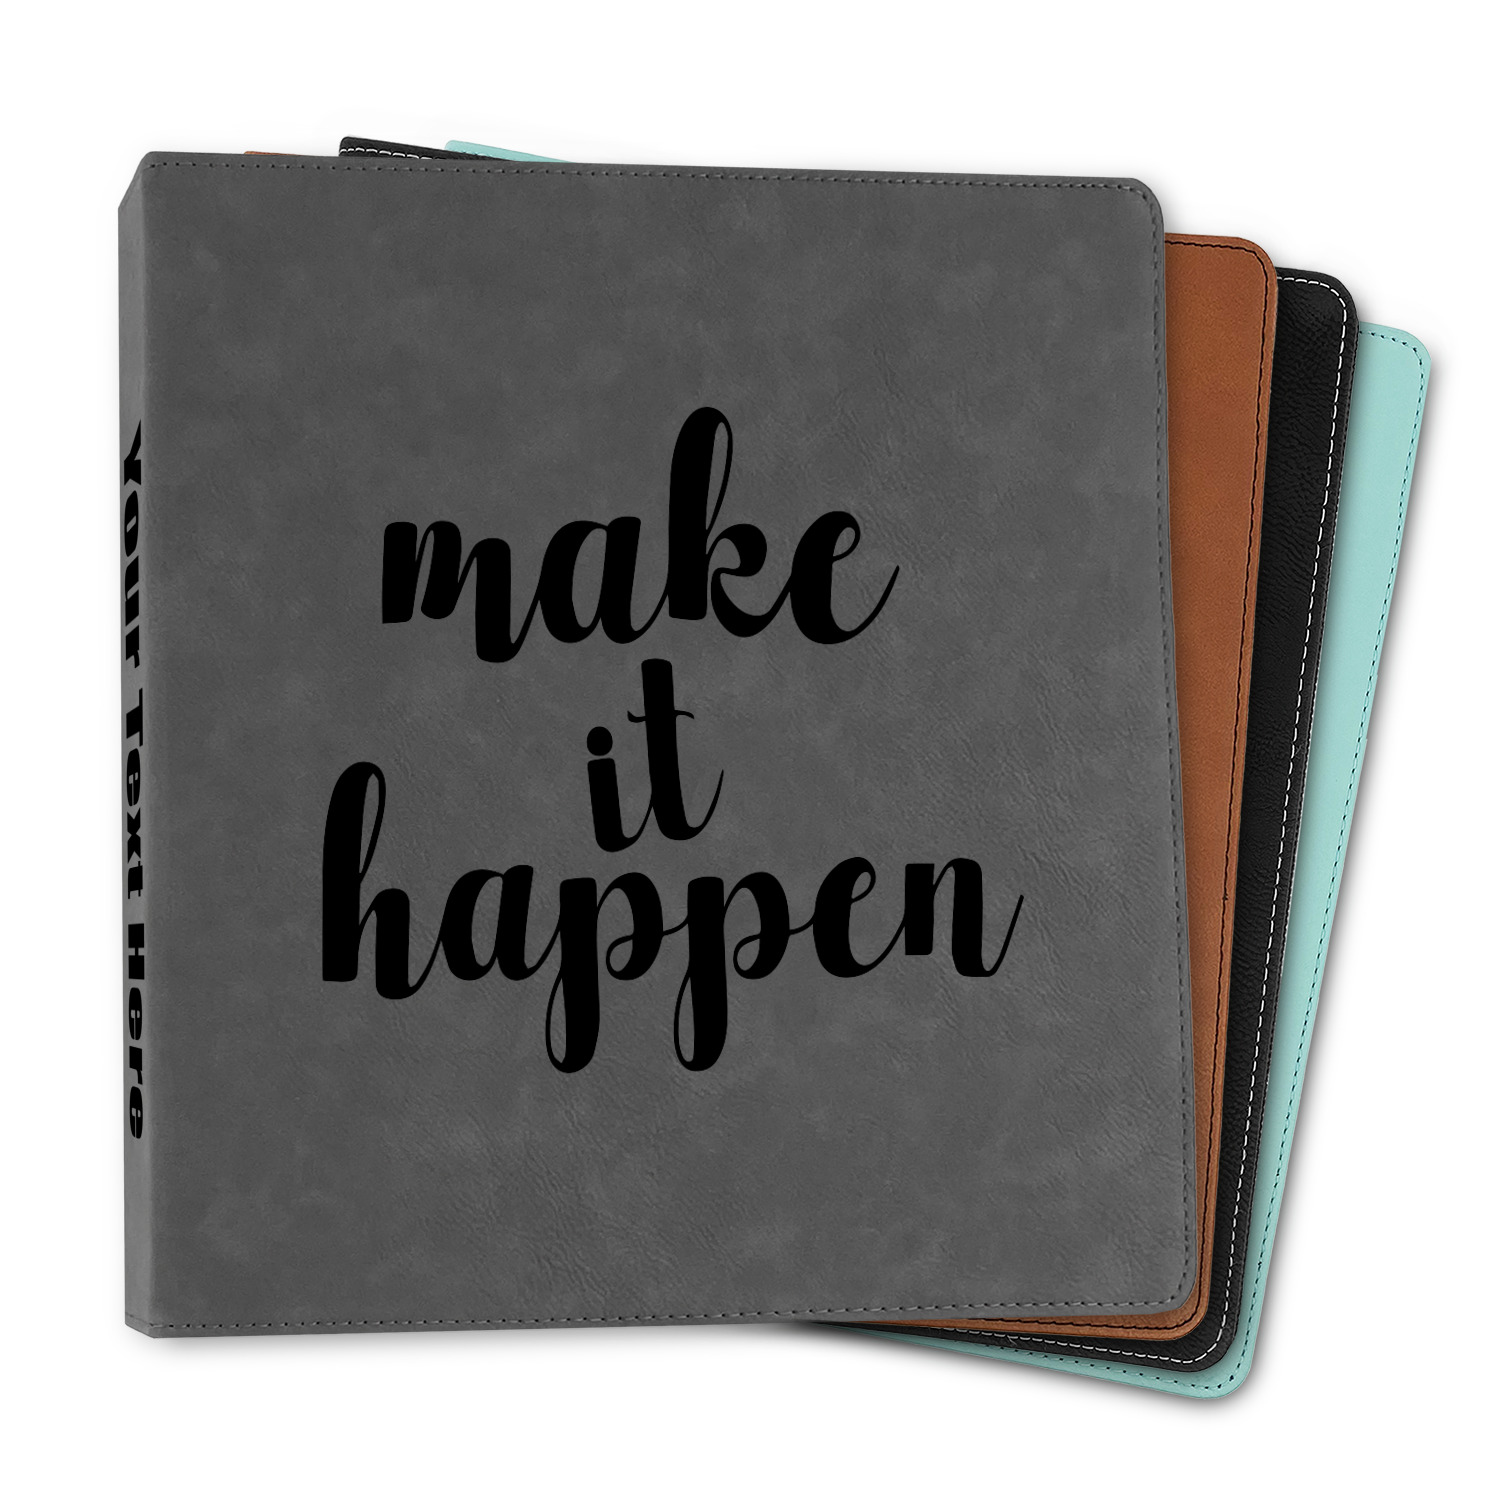 https://www.youcustomizeit.com/common/MAKE/1038234/Inspirational-Quotes-and-Sayings-Leather-Binders-1-Color-Options.jpg?lm=1655153004